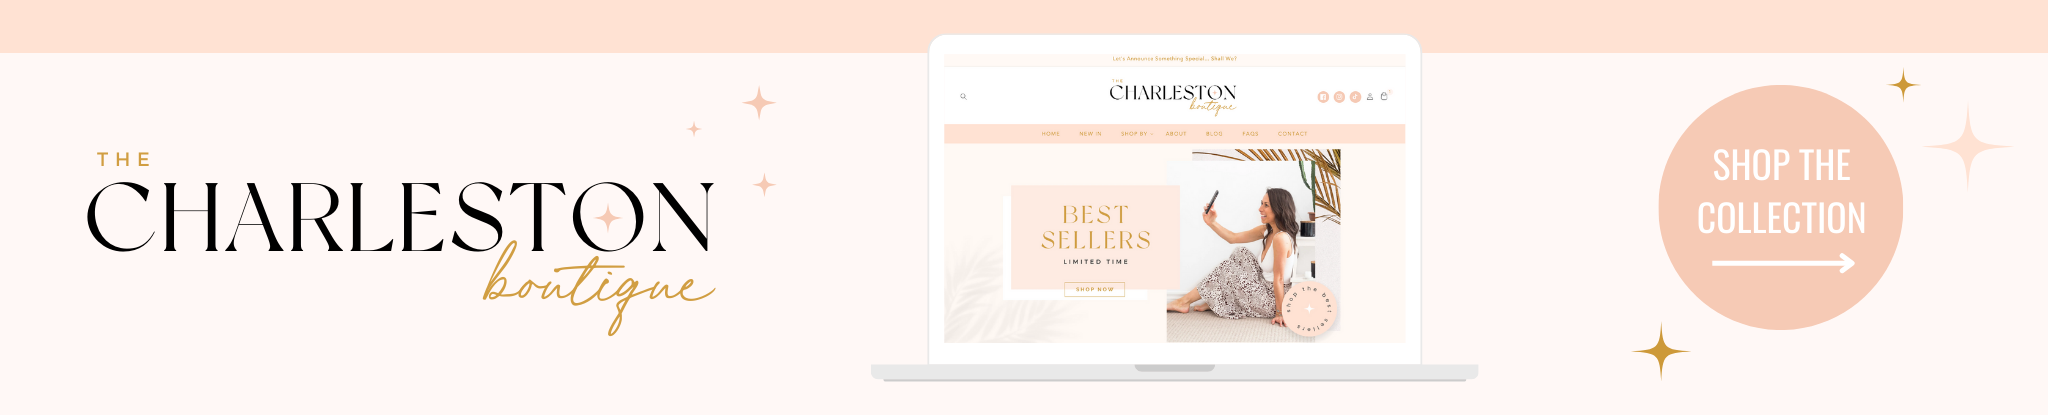 best shopify themes for clothing, premium shopify website themes